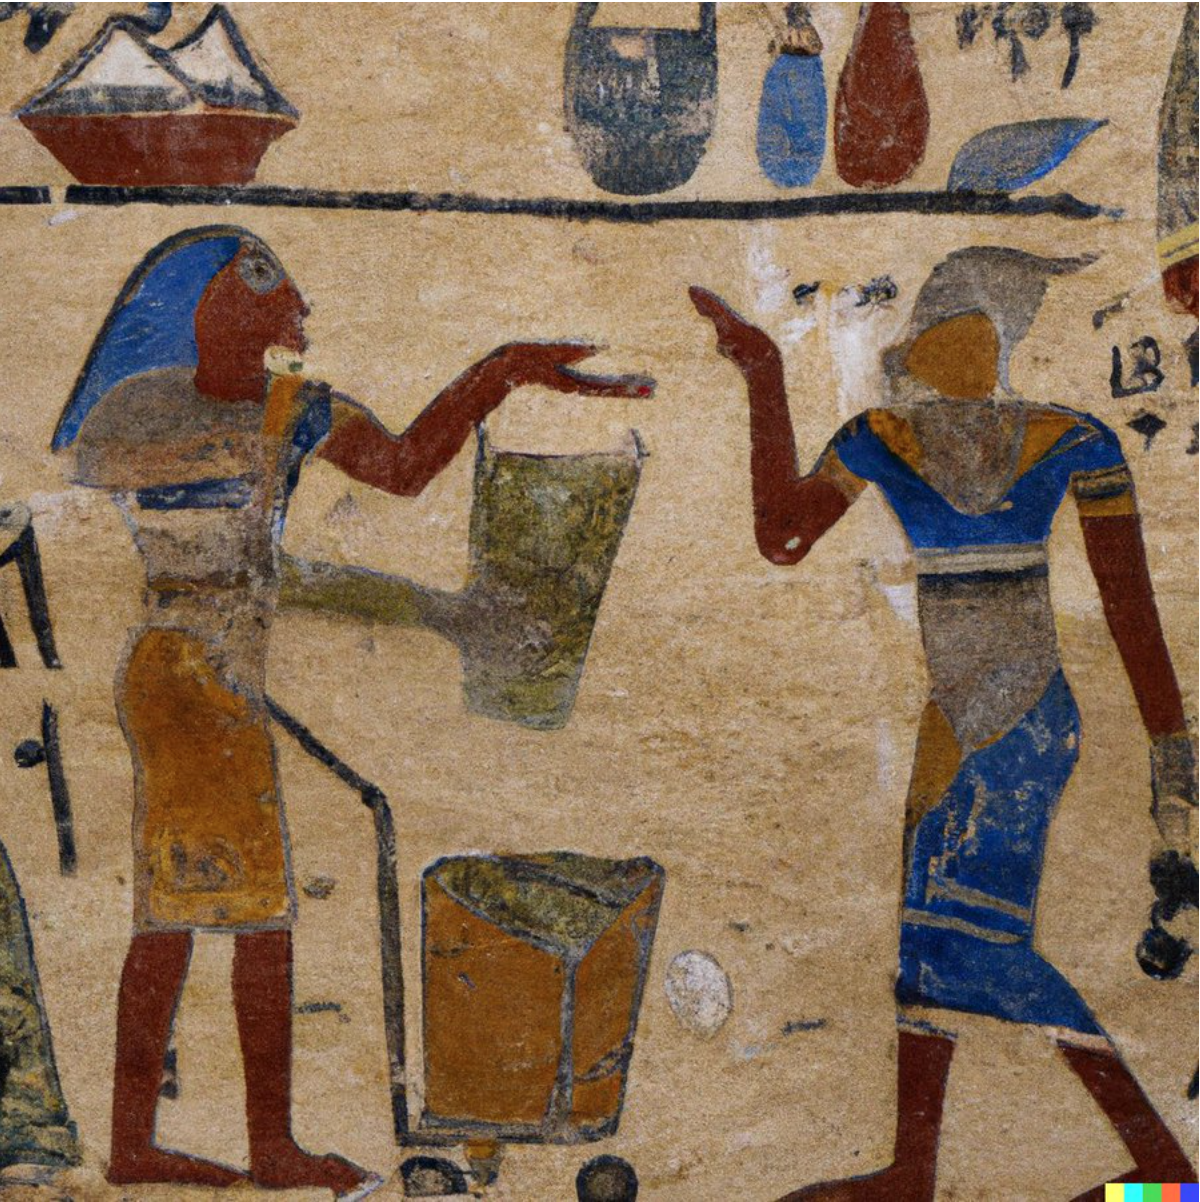 Ancient Egyptian painting depicting an argument about whose turn it is to take out the trash